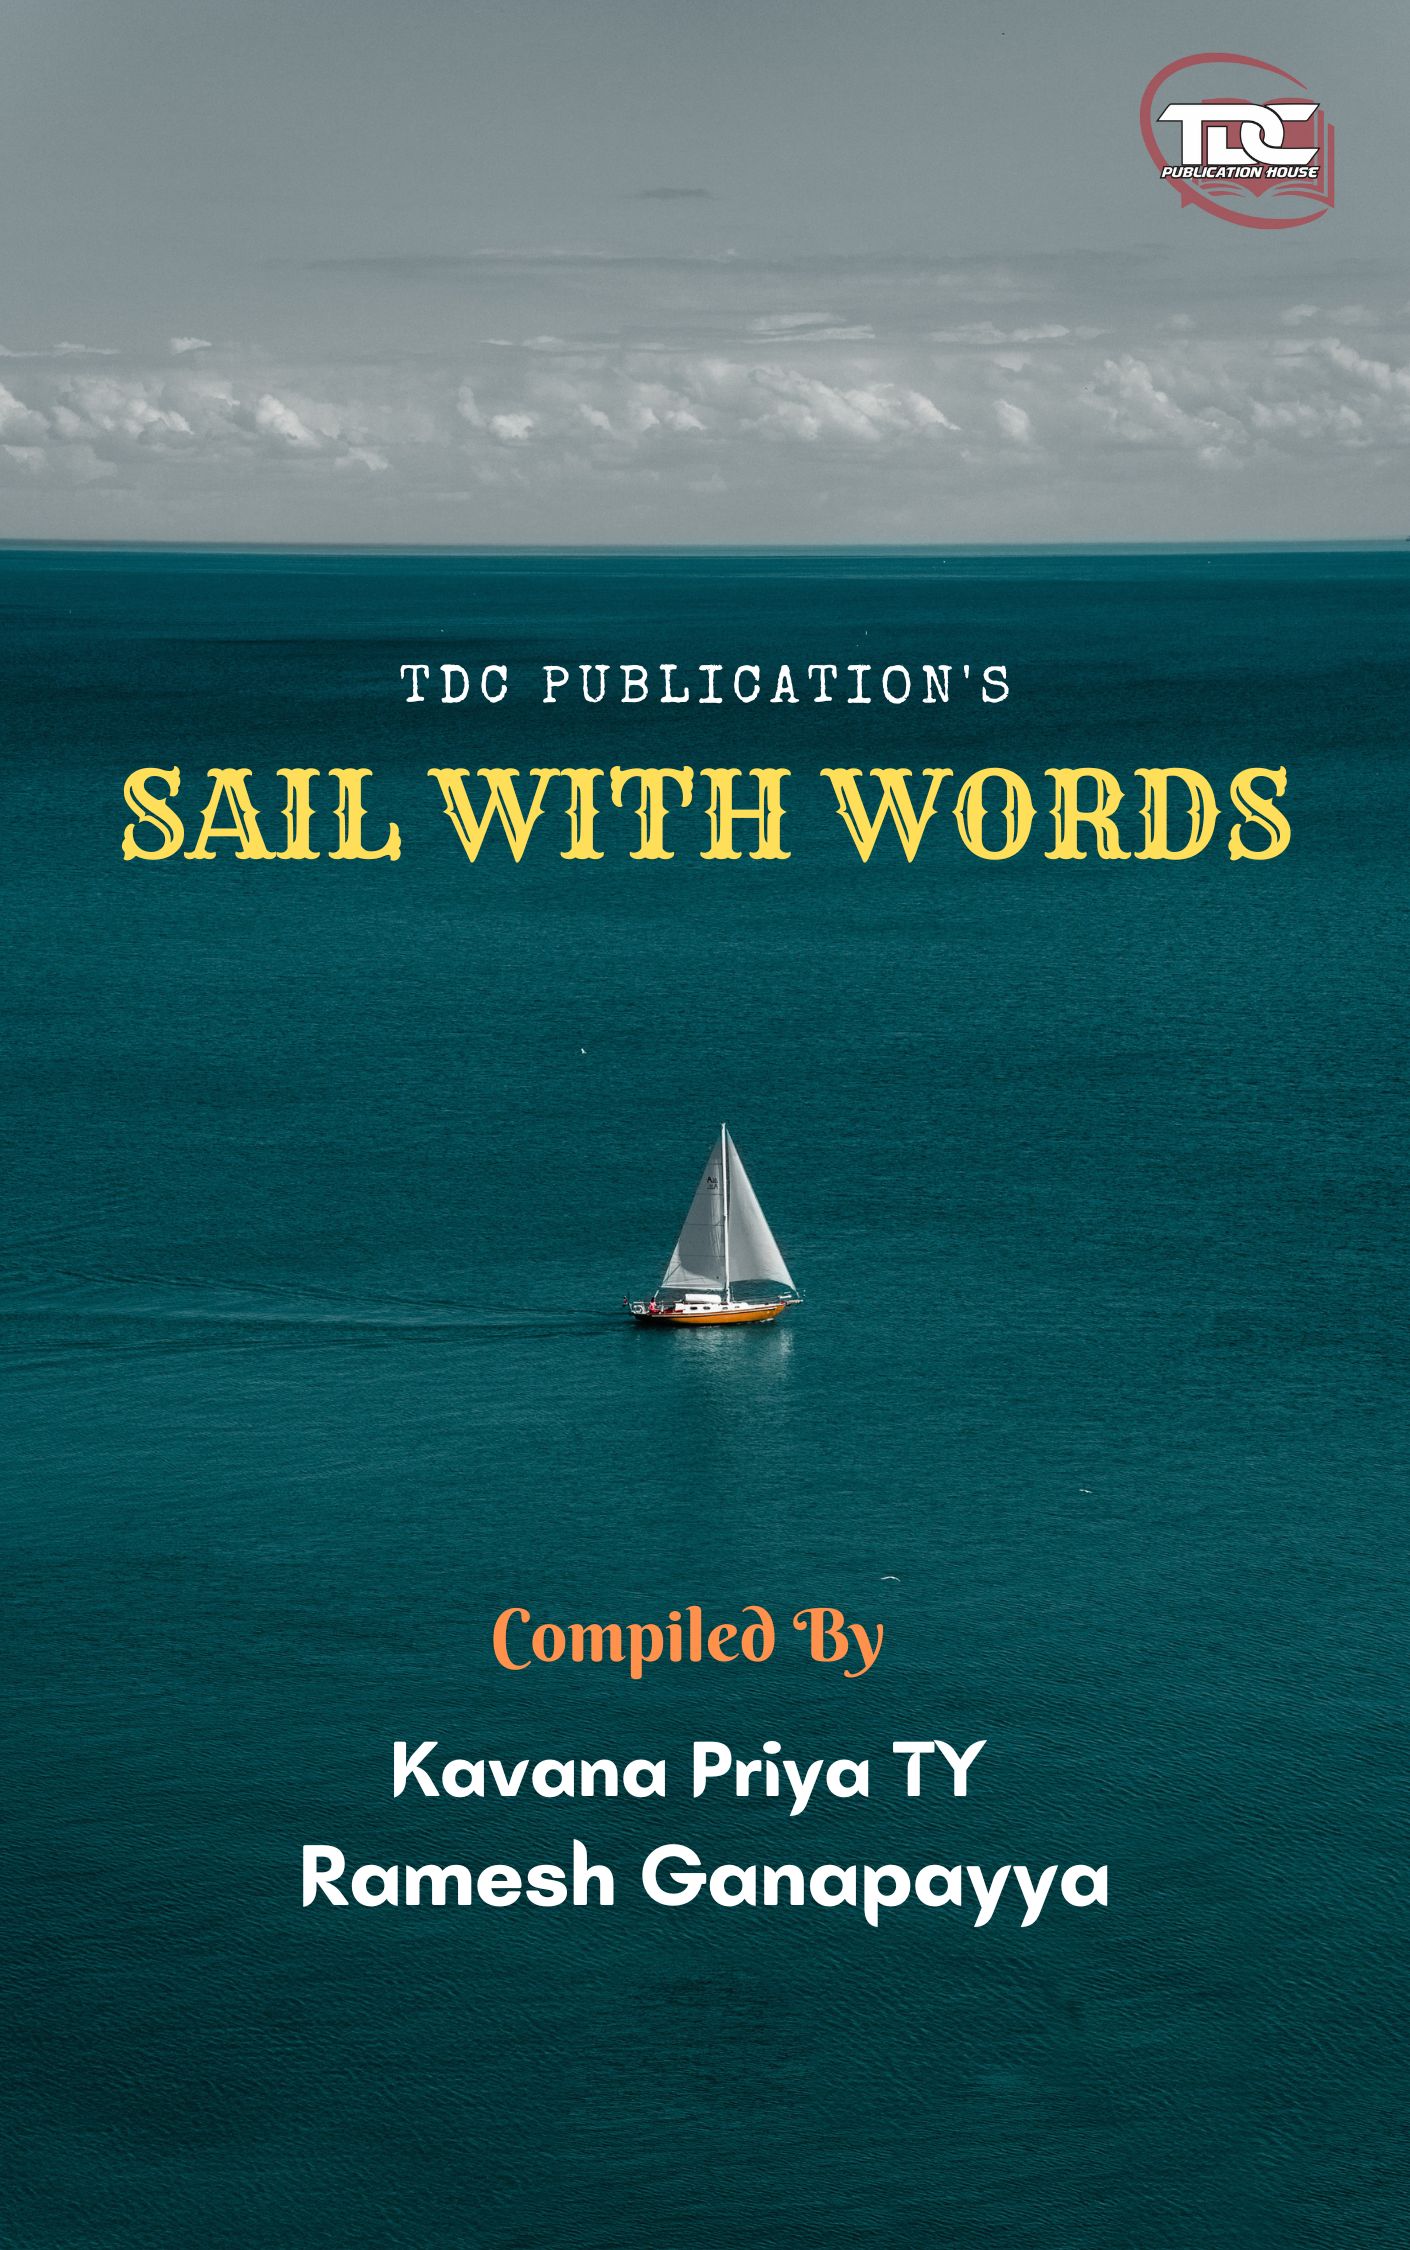 SAIL WITH WORDS